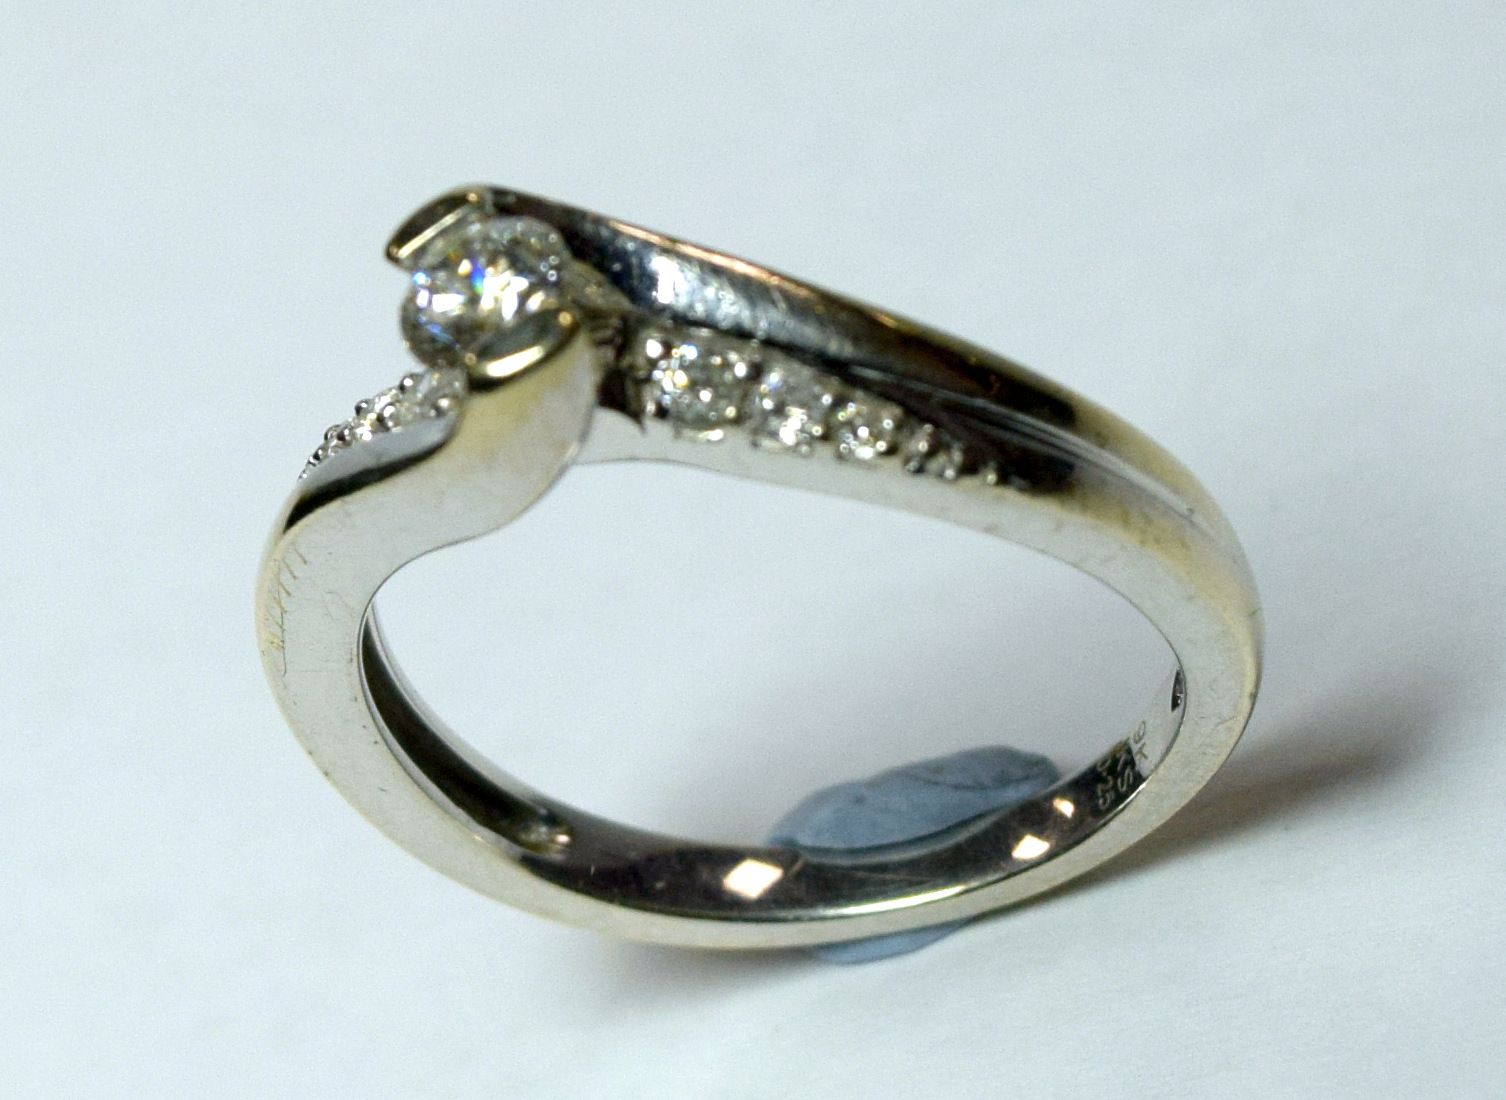 9ct gold Diamond Solitaire crossover ring with diamonds in shoulders - Image 3 of 6